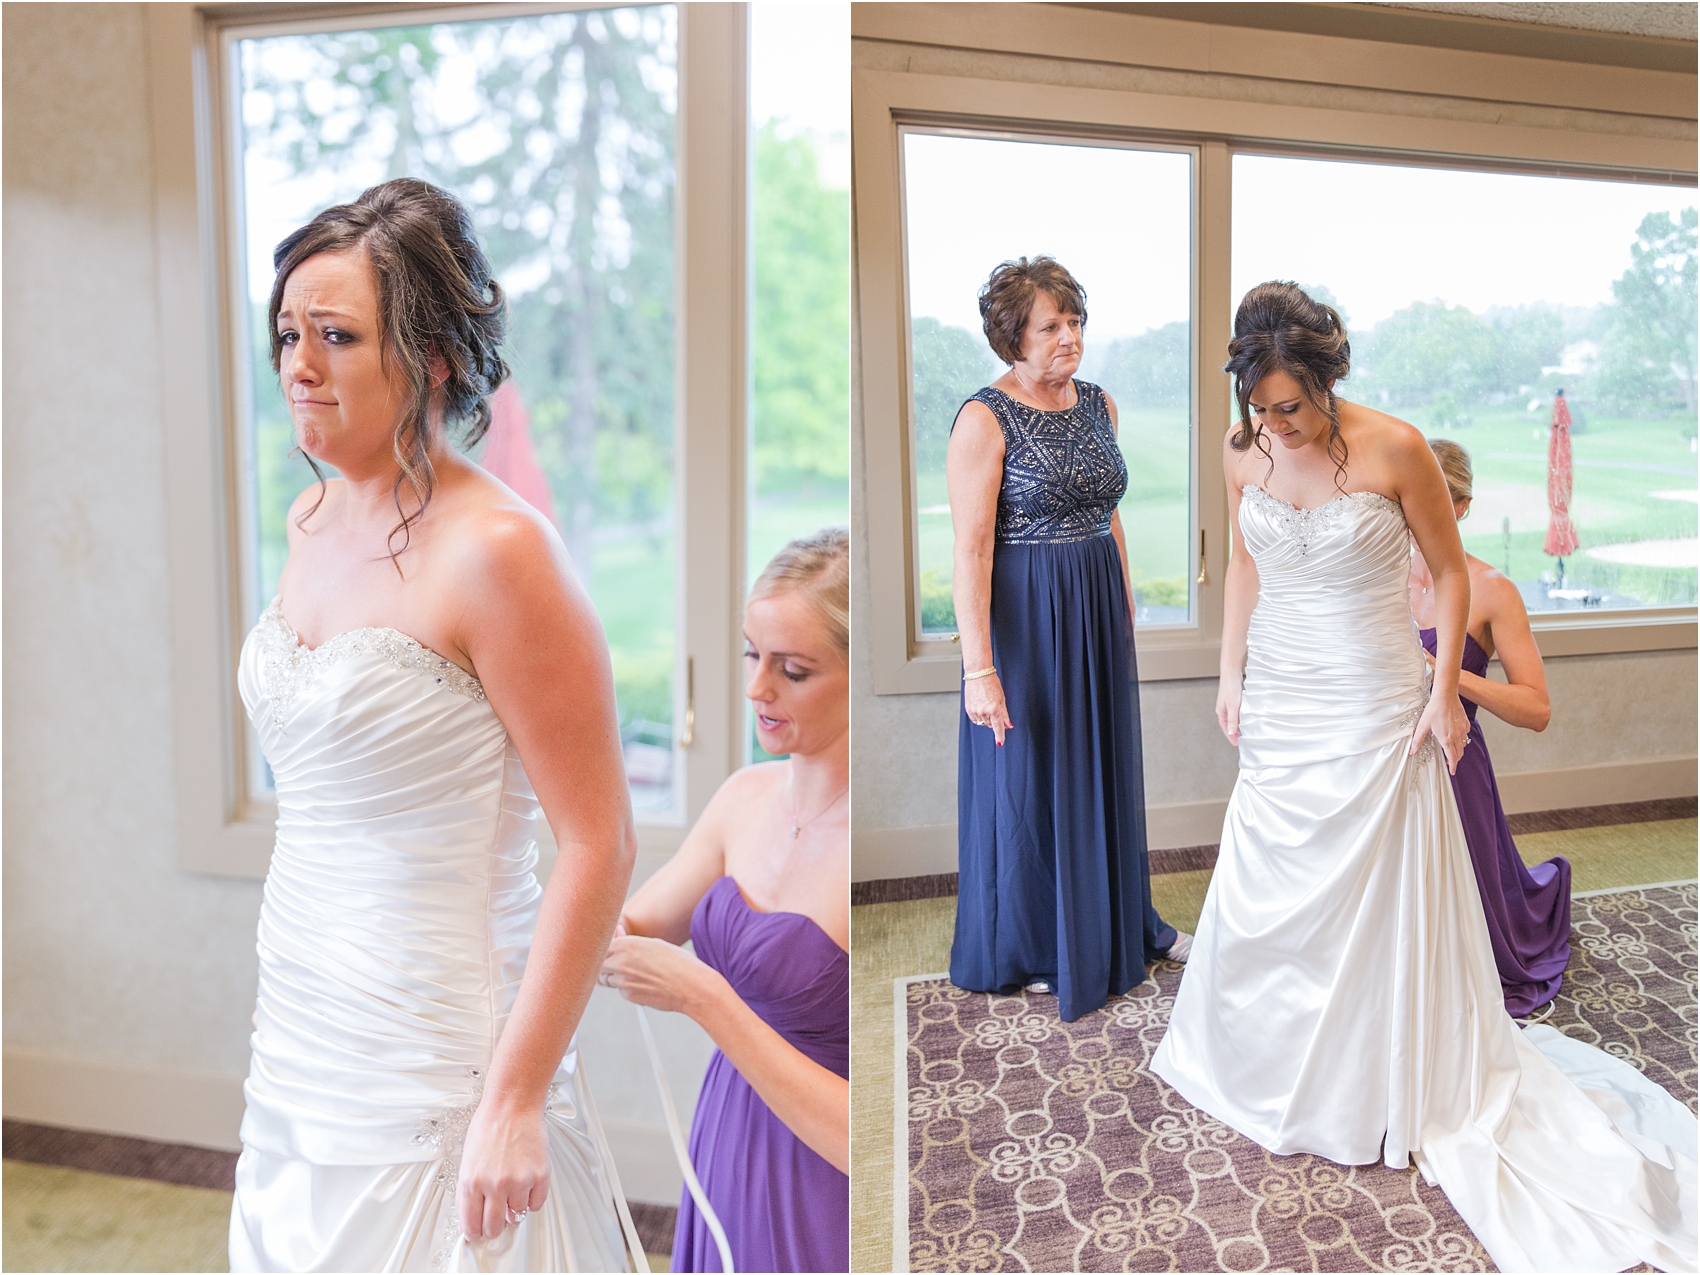 classic-wedding-photos-at-great-oaks-country-club-in-rochester-hills-mi-by-courtney-carolyn-photography_0014.jpg